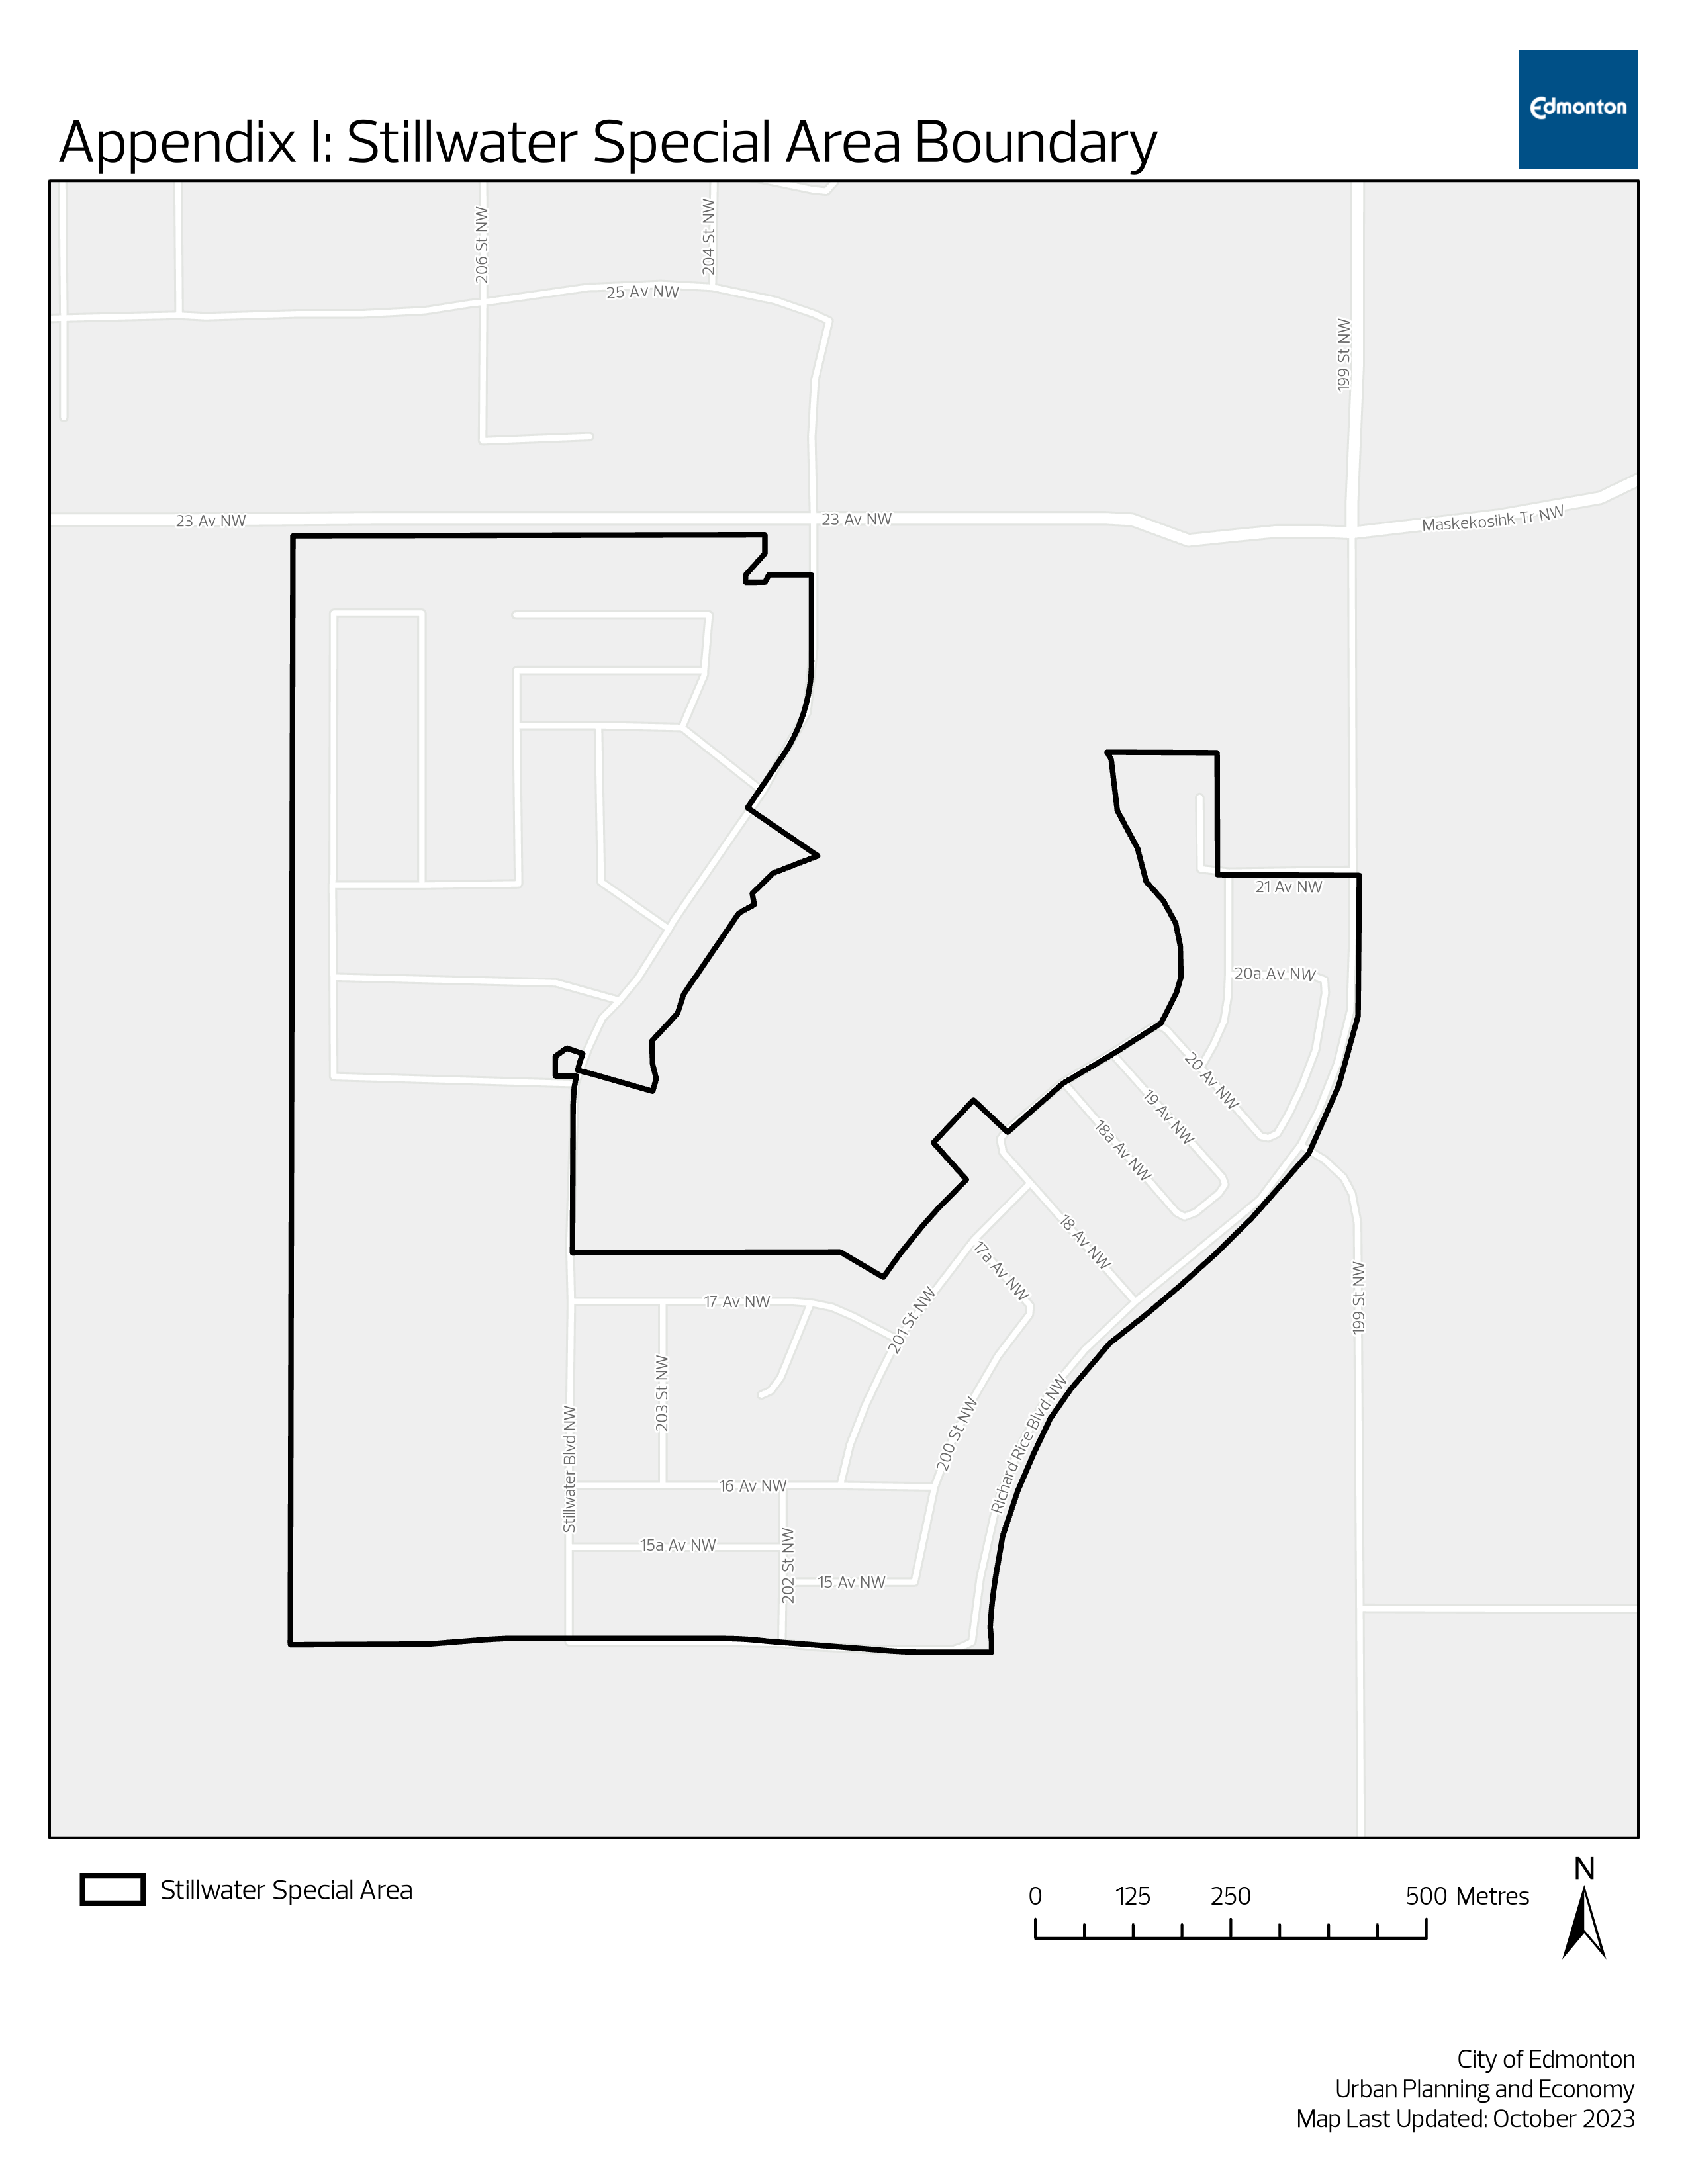 Stillwater Special Area boundary map